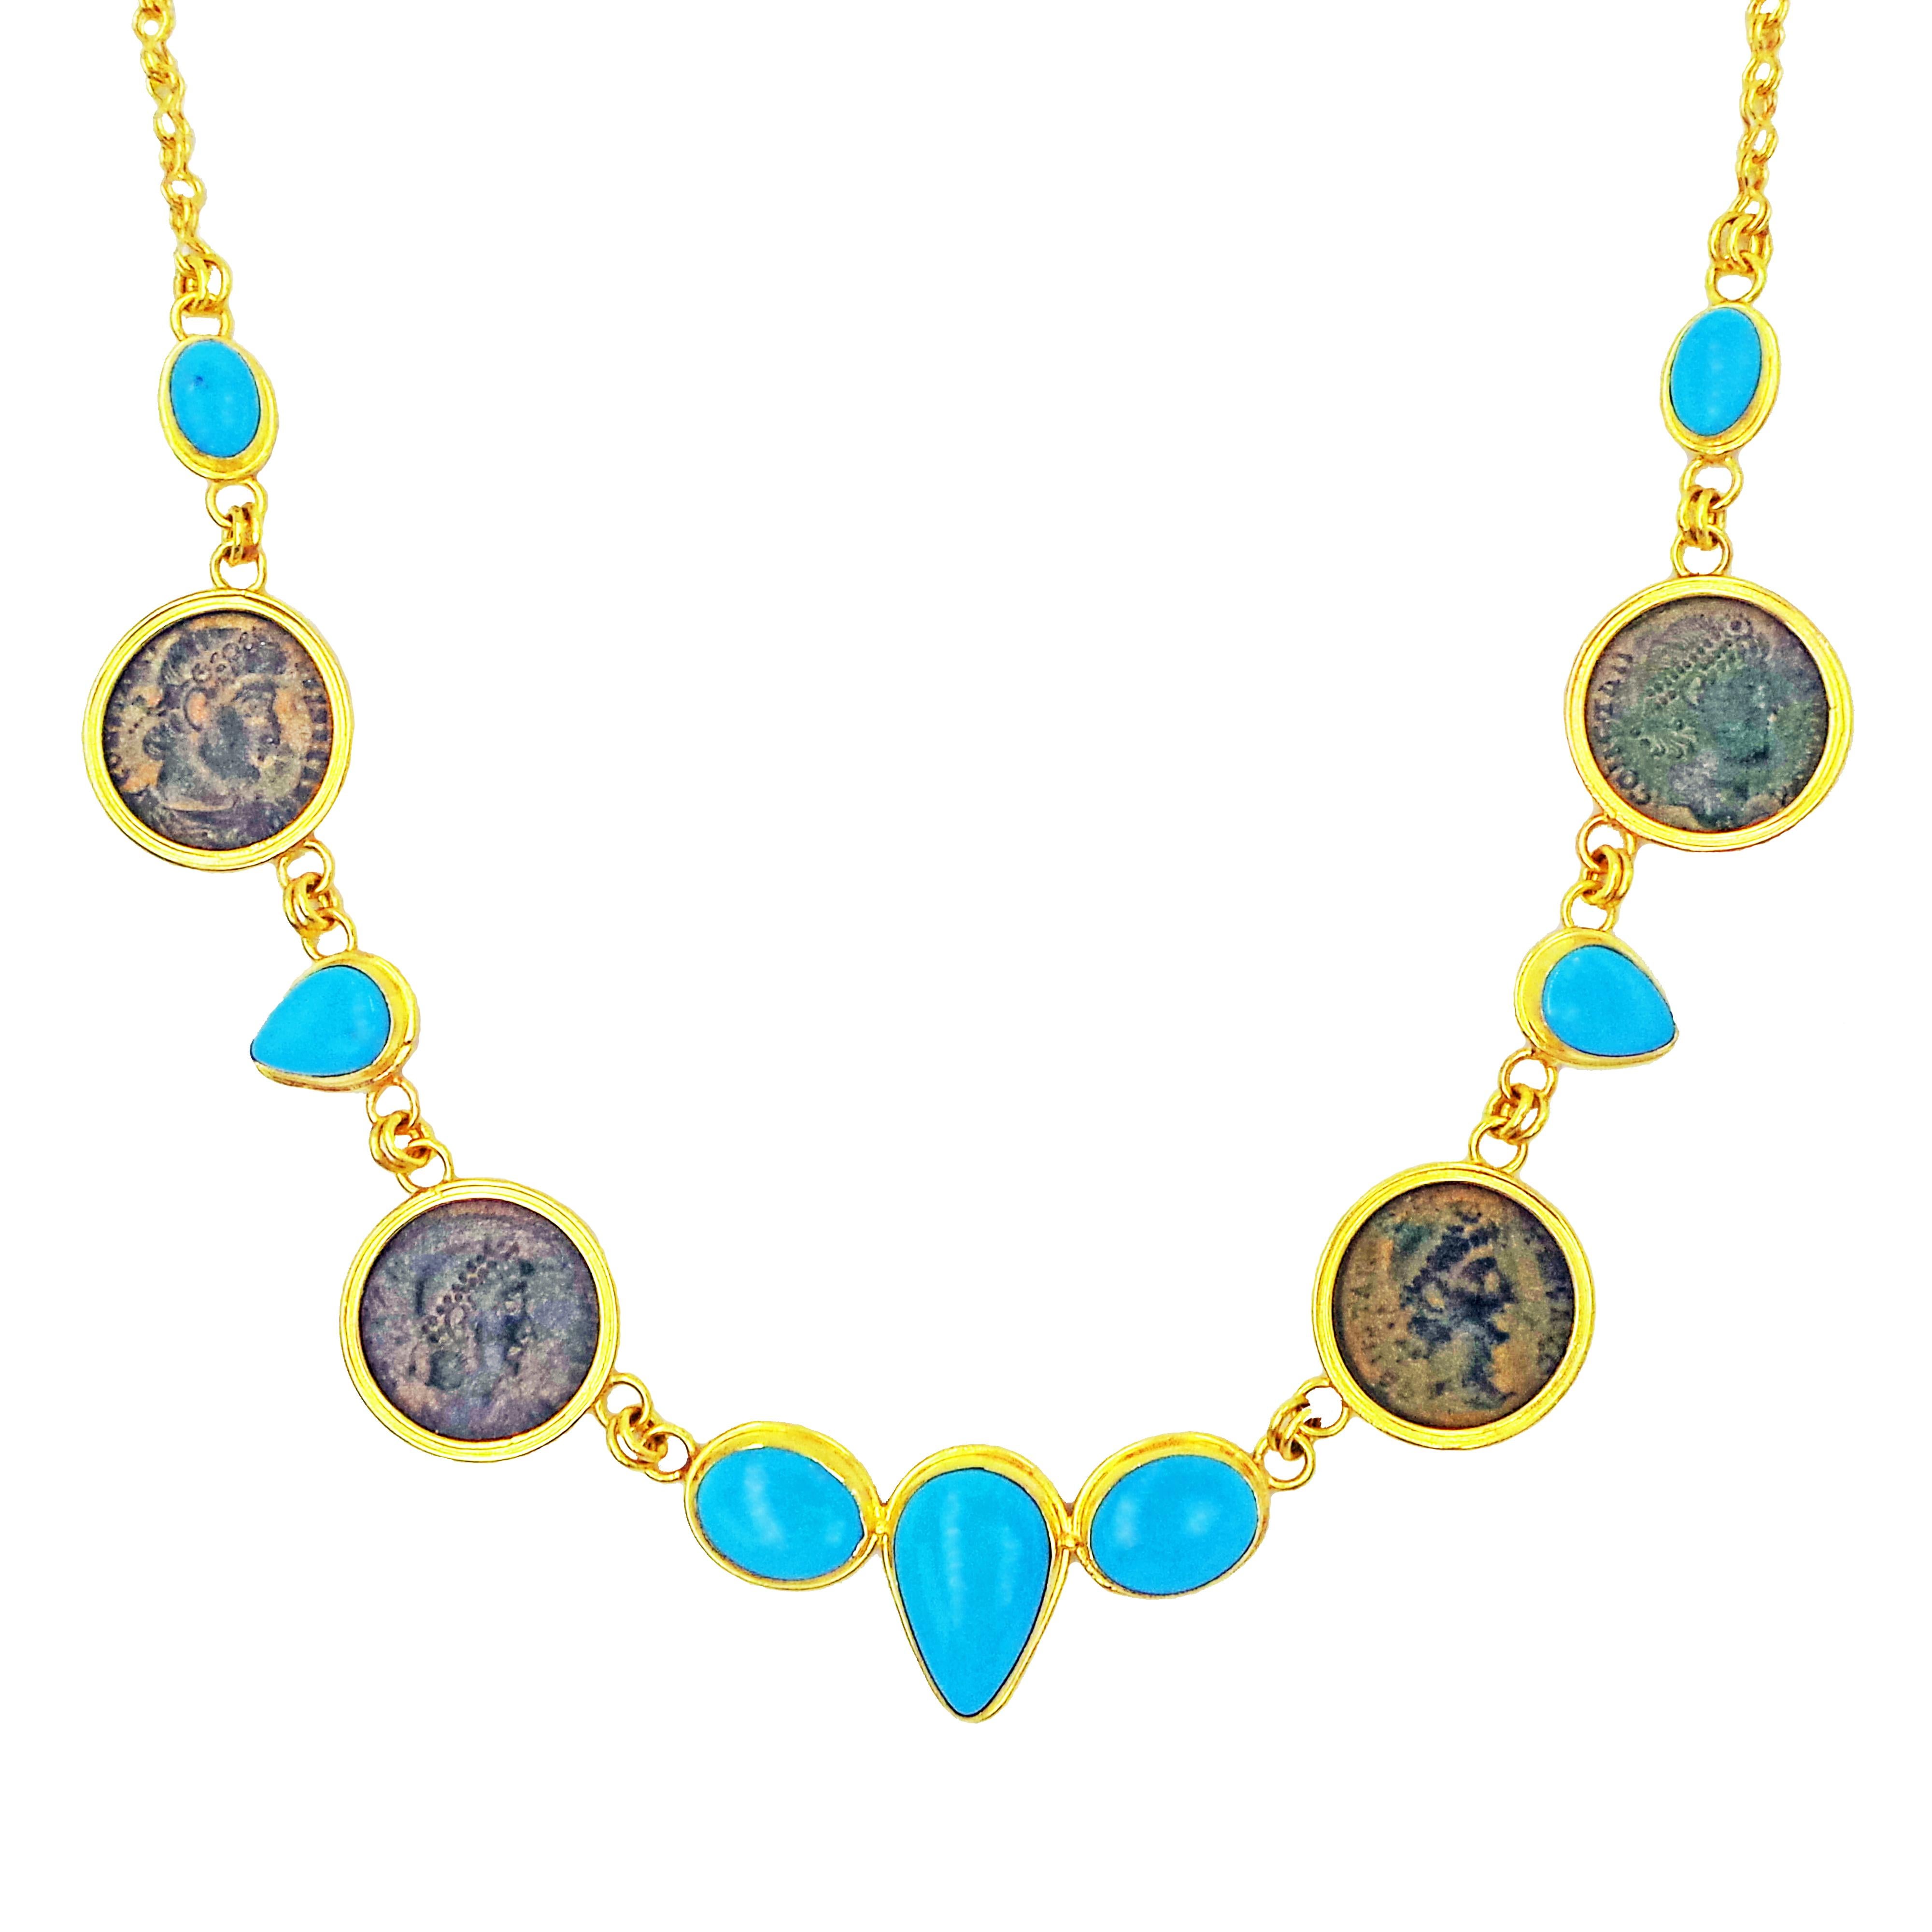 Beautiful, one-of-a-kind collar necklace featuring seven Persian Turquoise gemstones and four authentic ancient Roman bronze coins (Constantius II, 337-361 AD) set in 22k yellow gold and connected with chain. Necklace is finished with a 18k gold